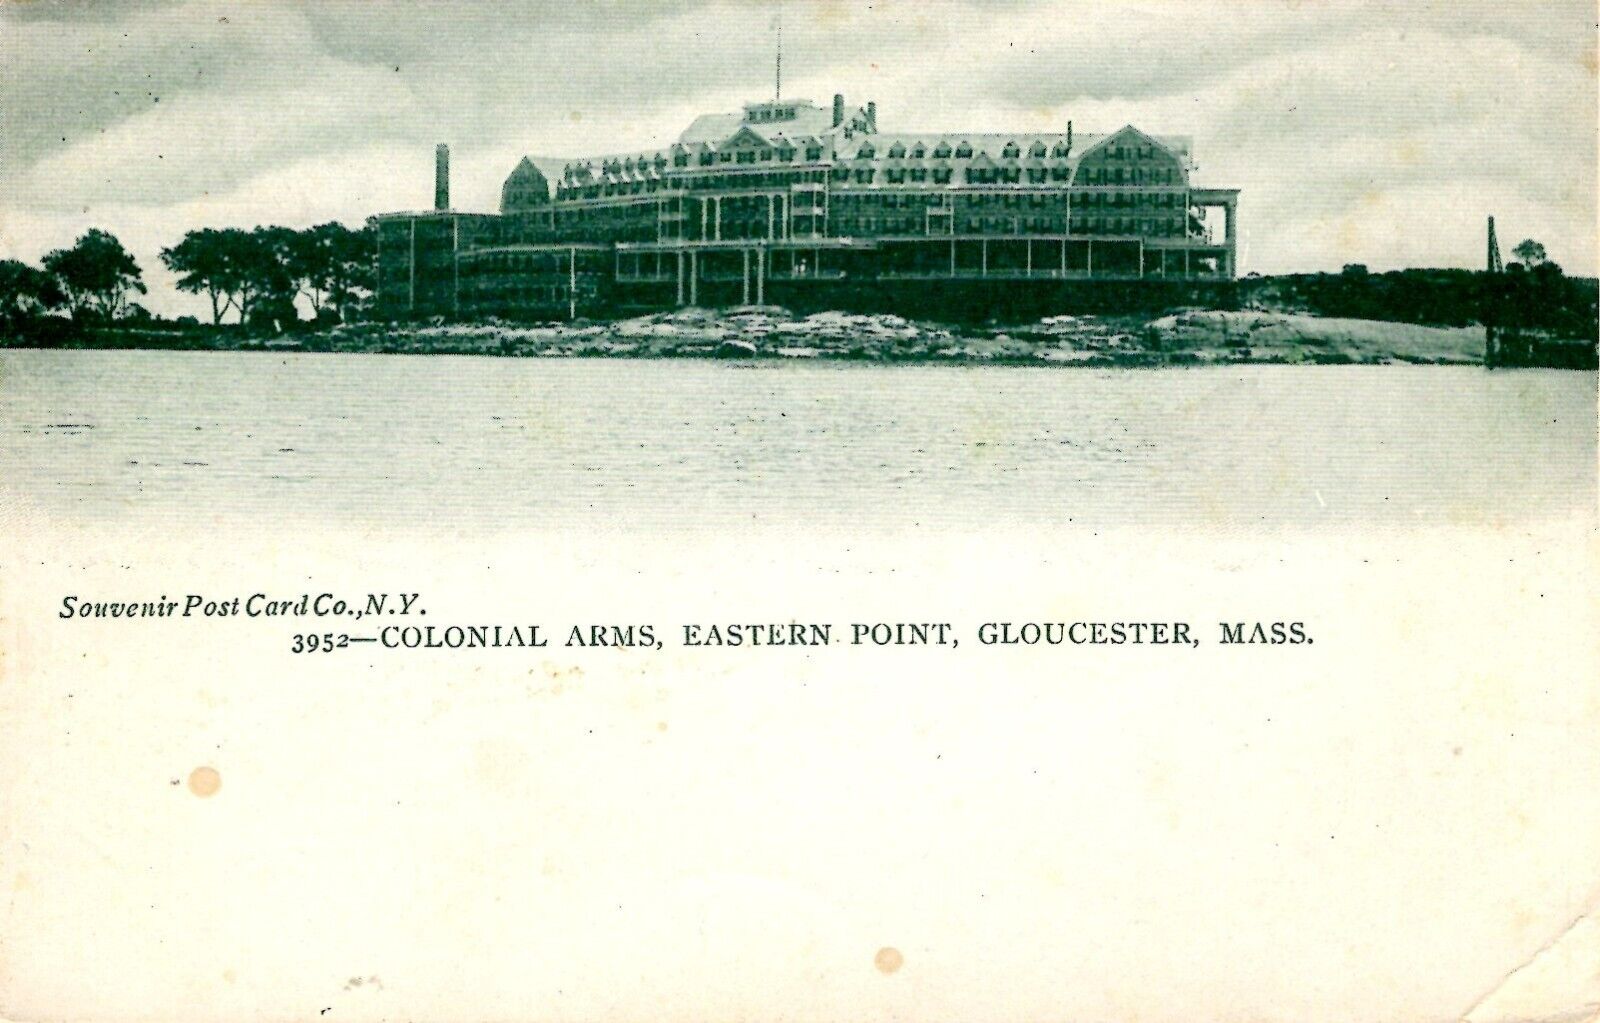 Gloucester, Massachusetts - The Colonial Arms on the Eastern Point - c1905